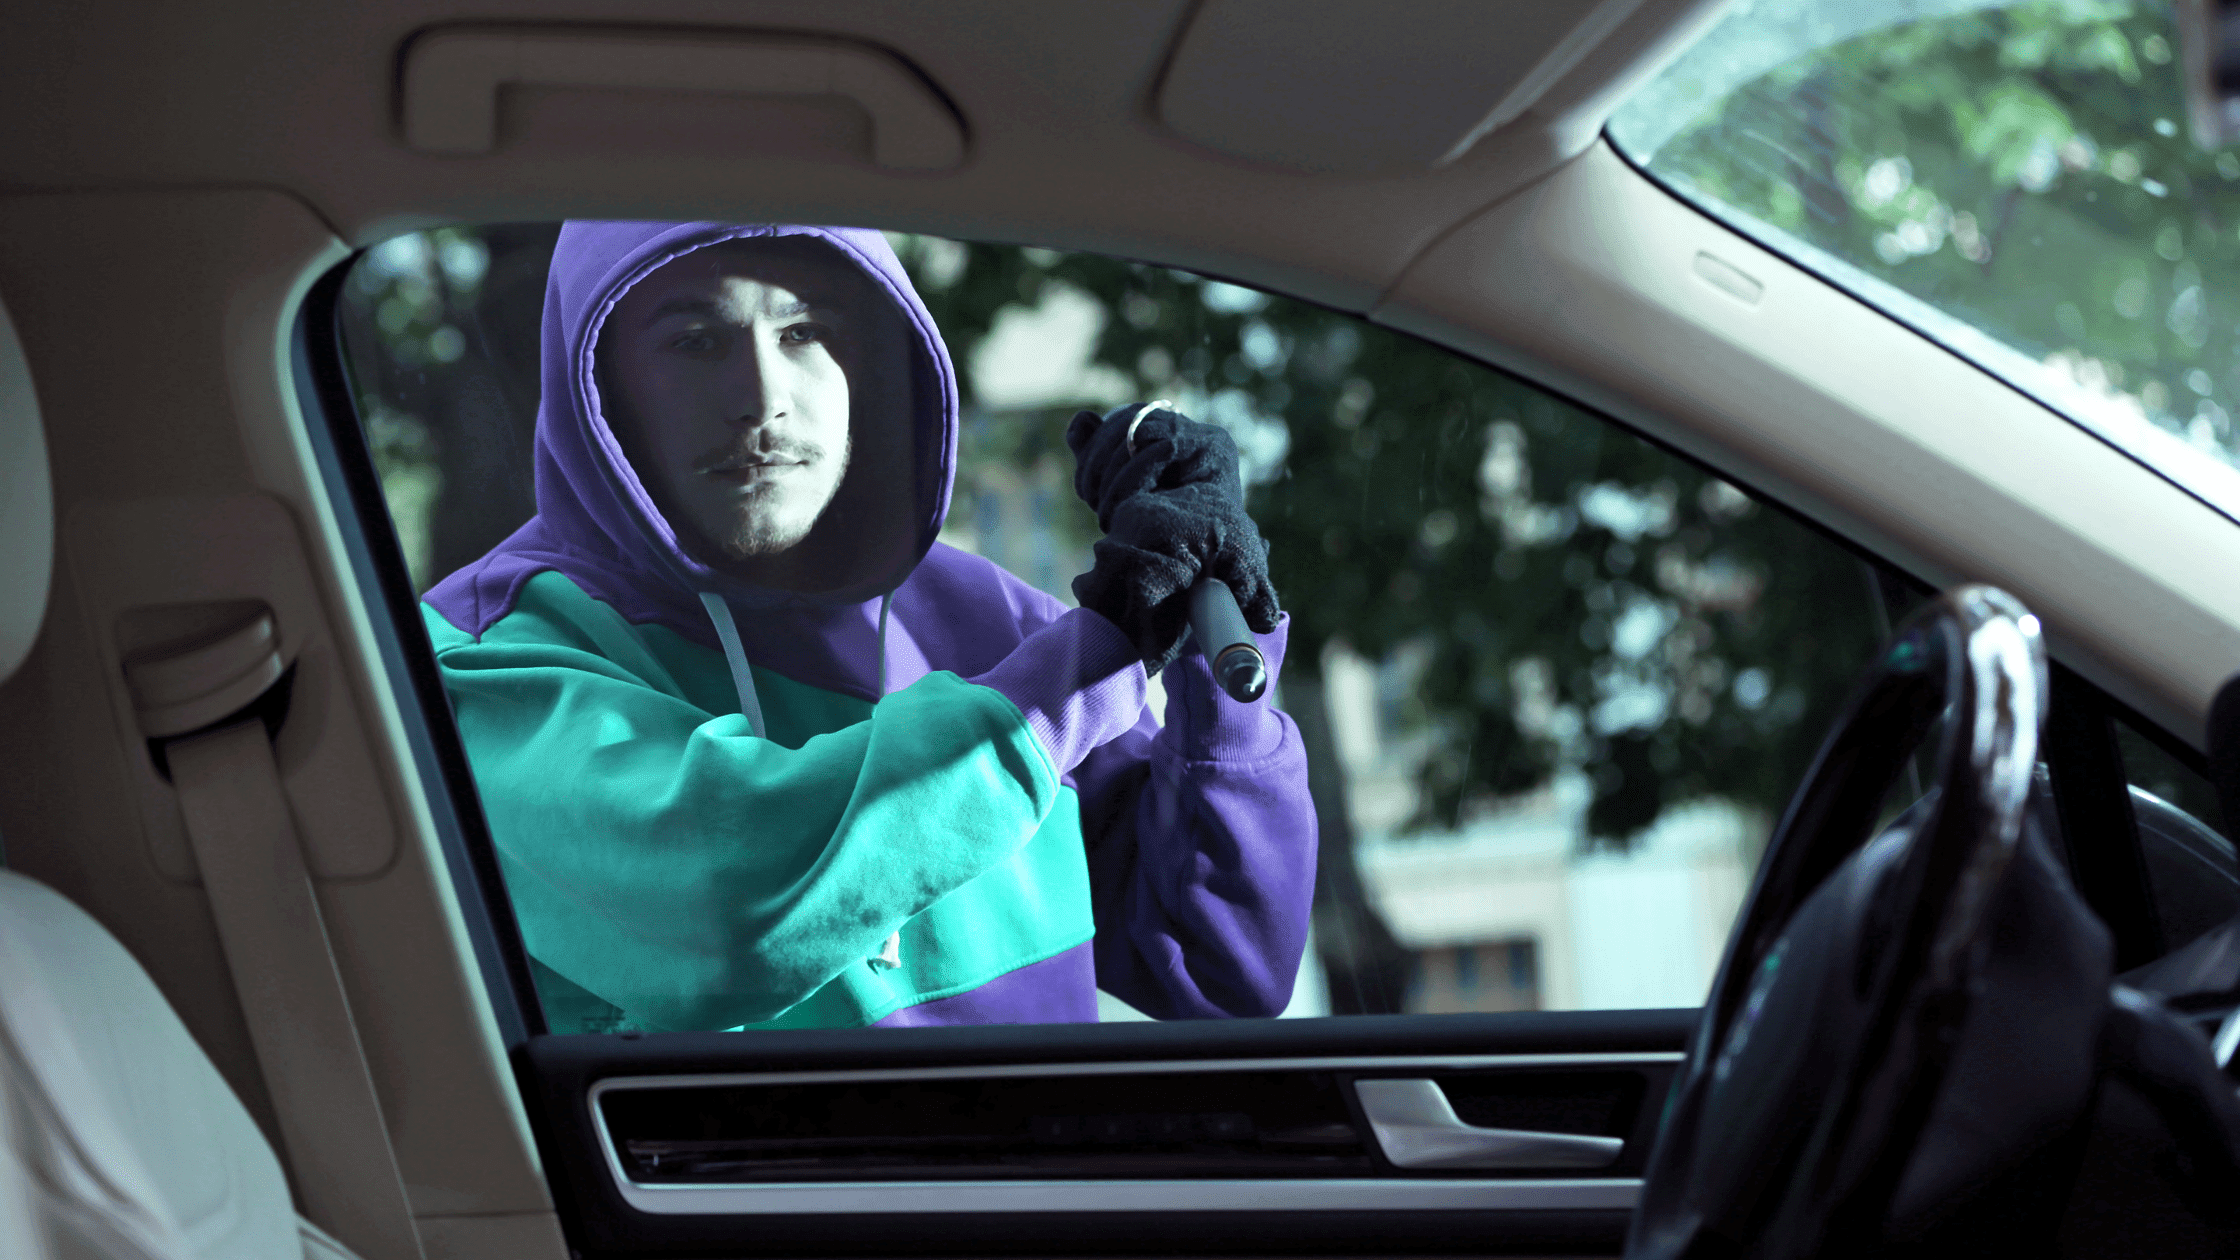 How To Break Car Window Quietly In Emergency: Best Tips To Use.